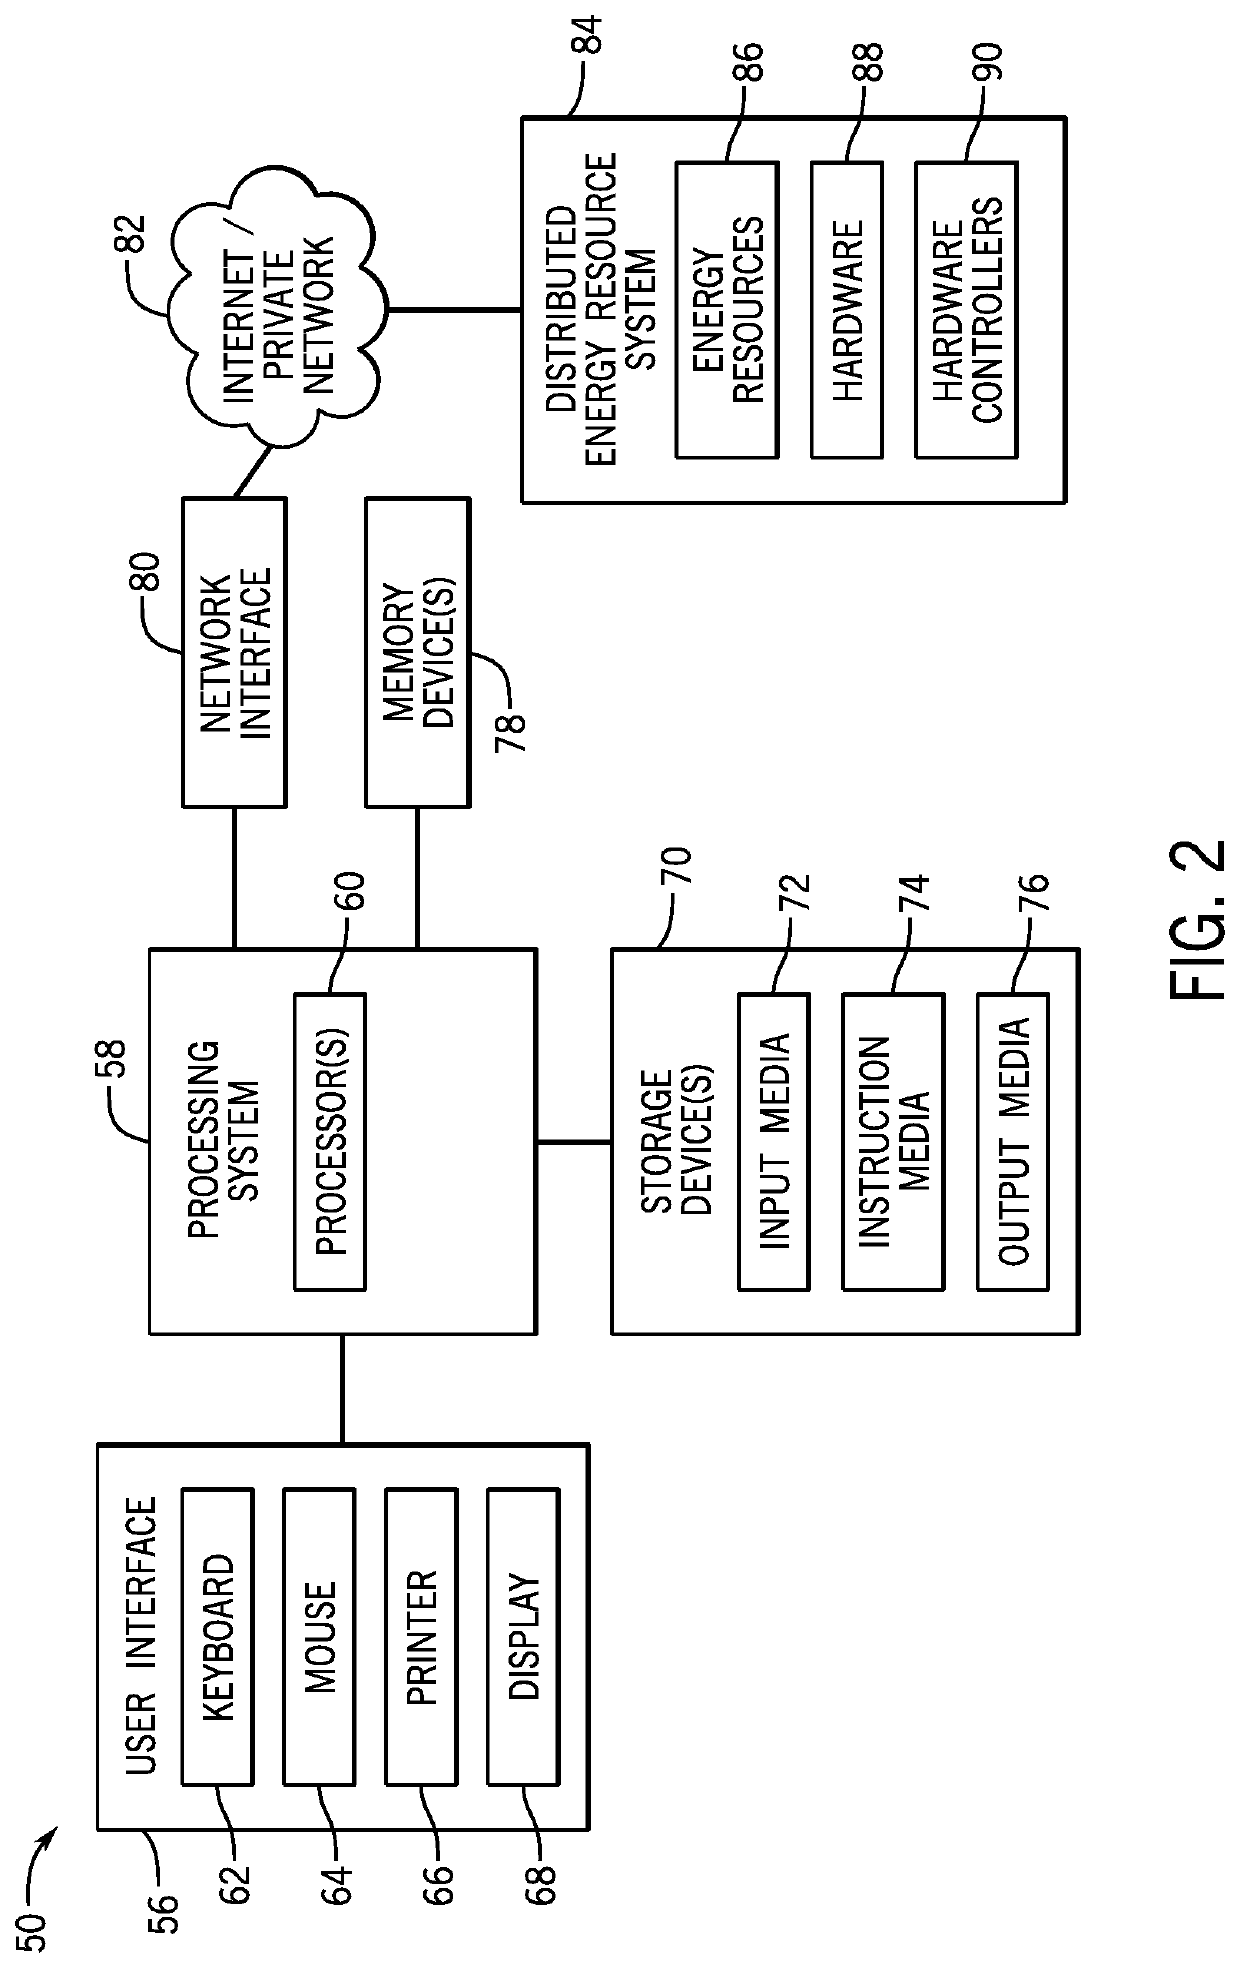 Distributed energy resource system design and operation